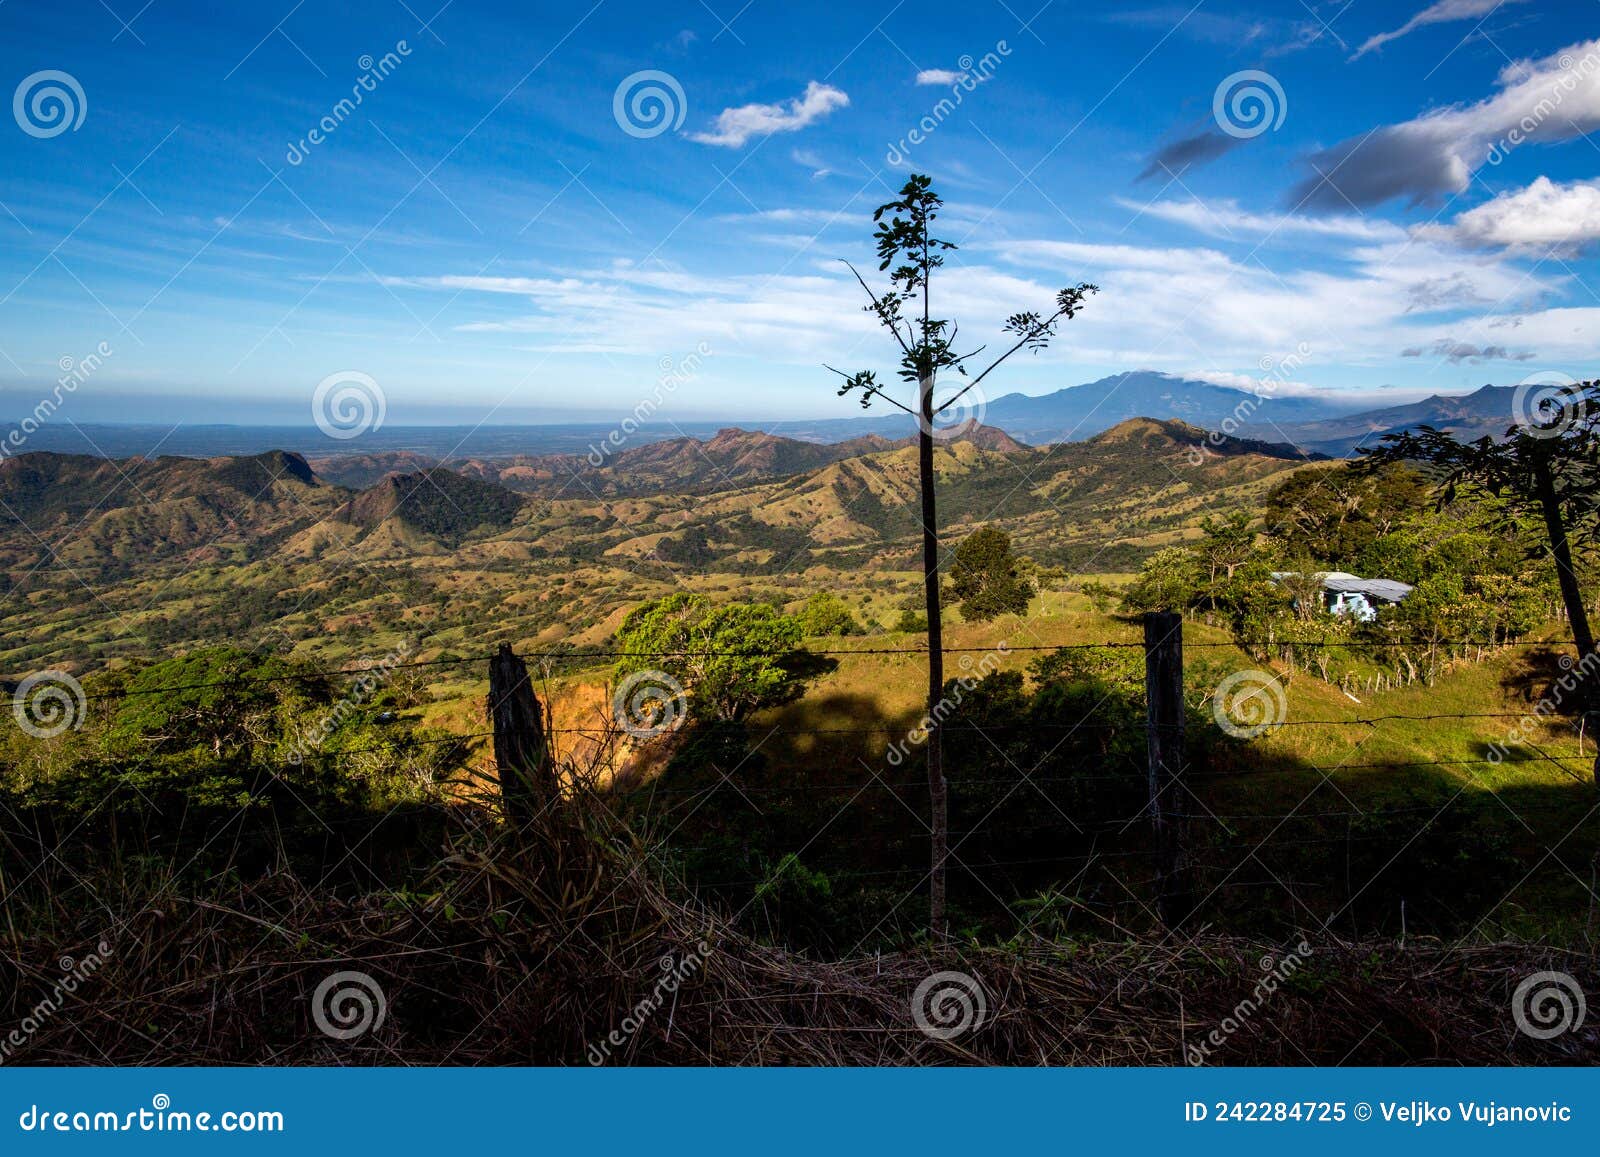 panorama of plateaus and mountains of panama on the way to reserva forestal de fortuna and punta pena.